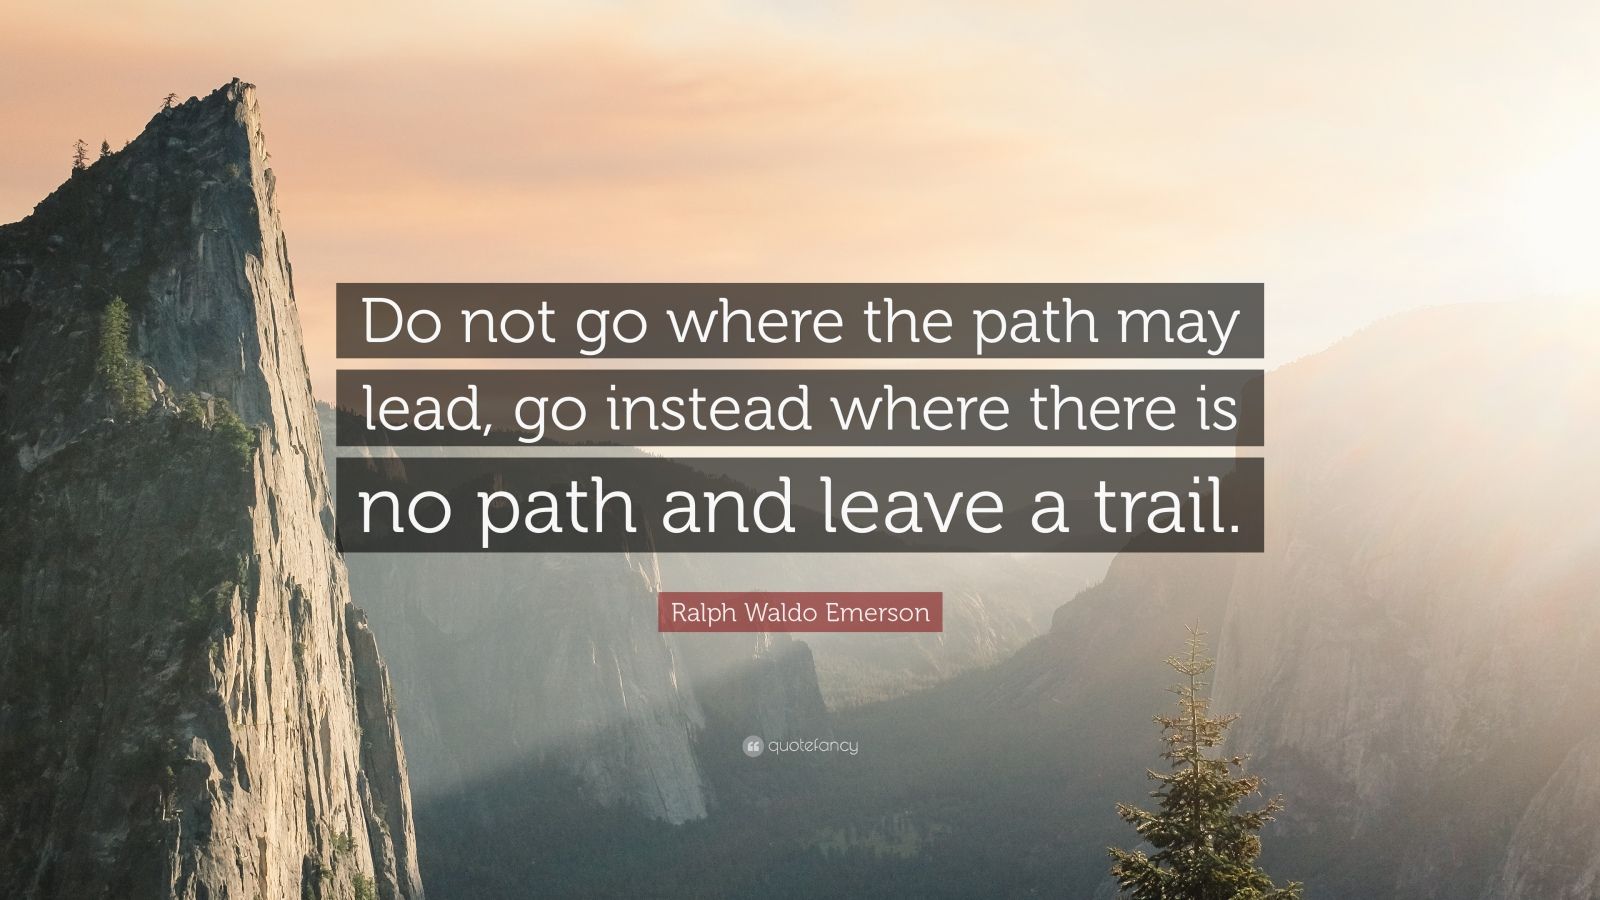 Ralph Waldo Emerson Quote: “Do not go where the path may lead, go